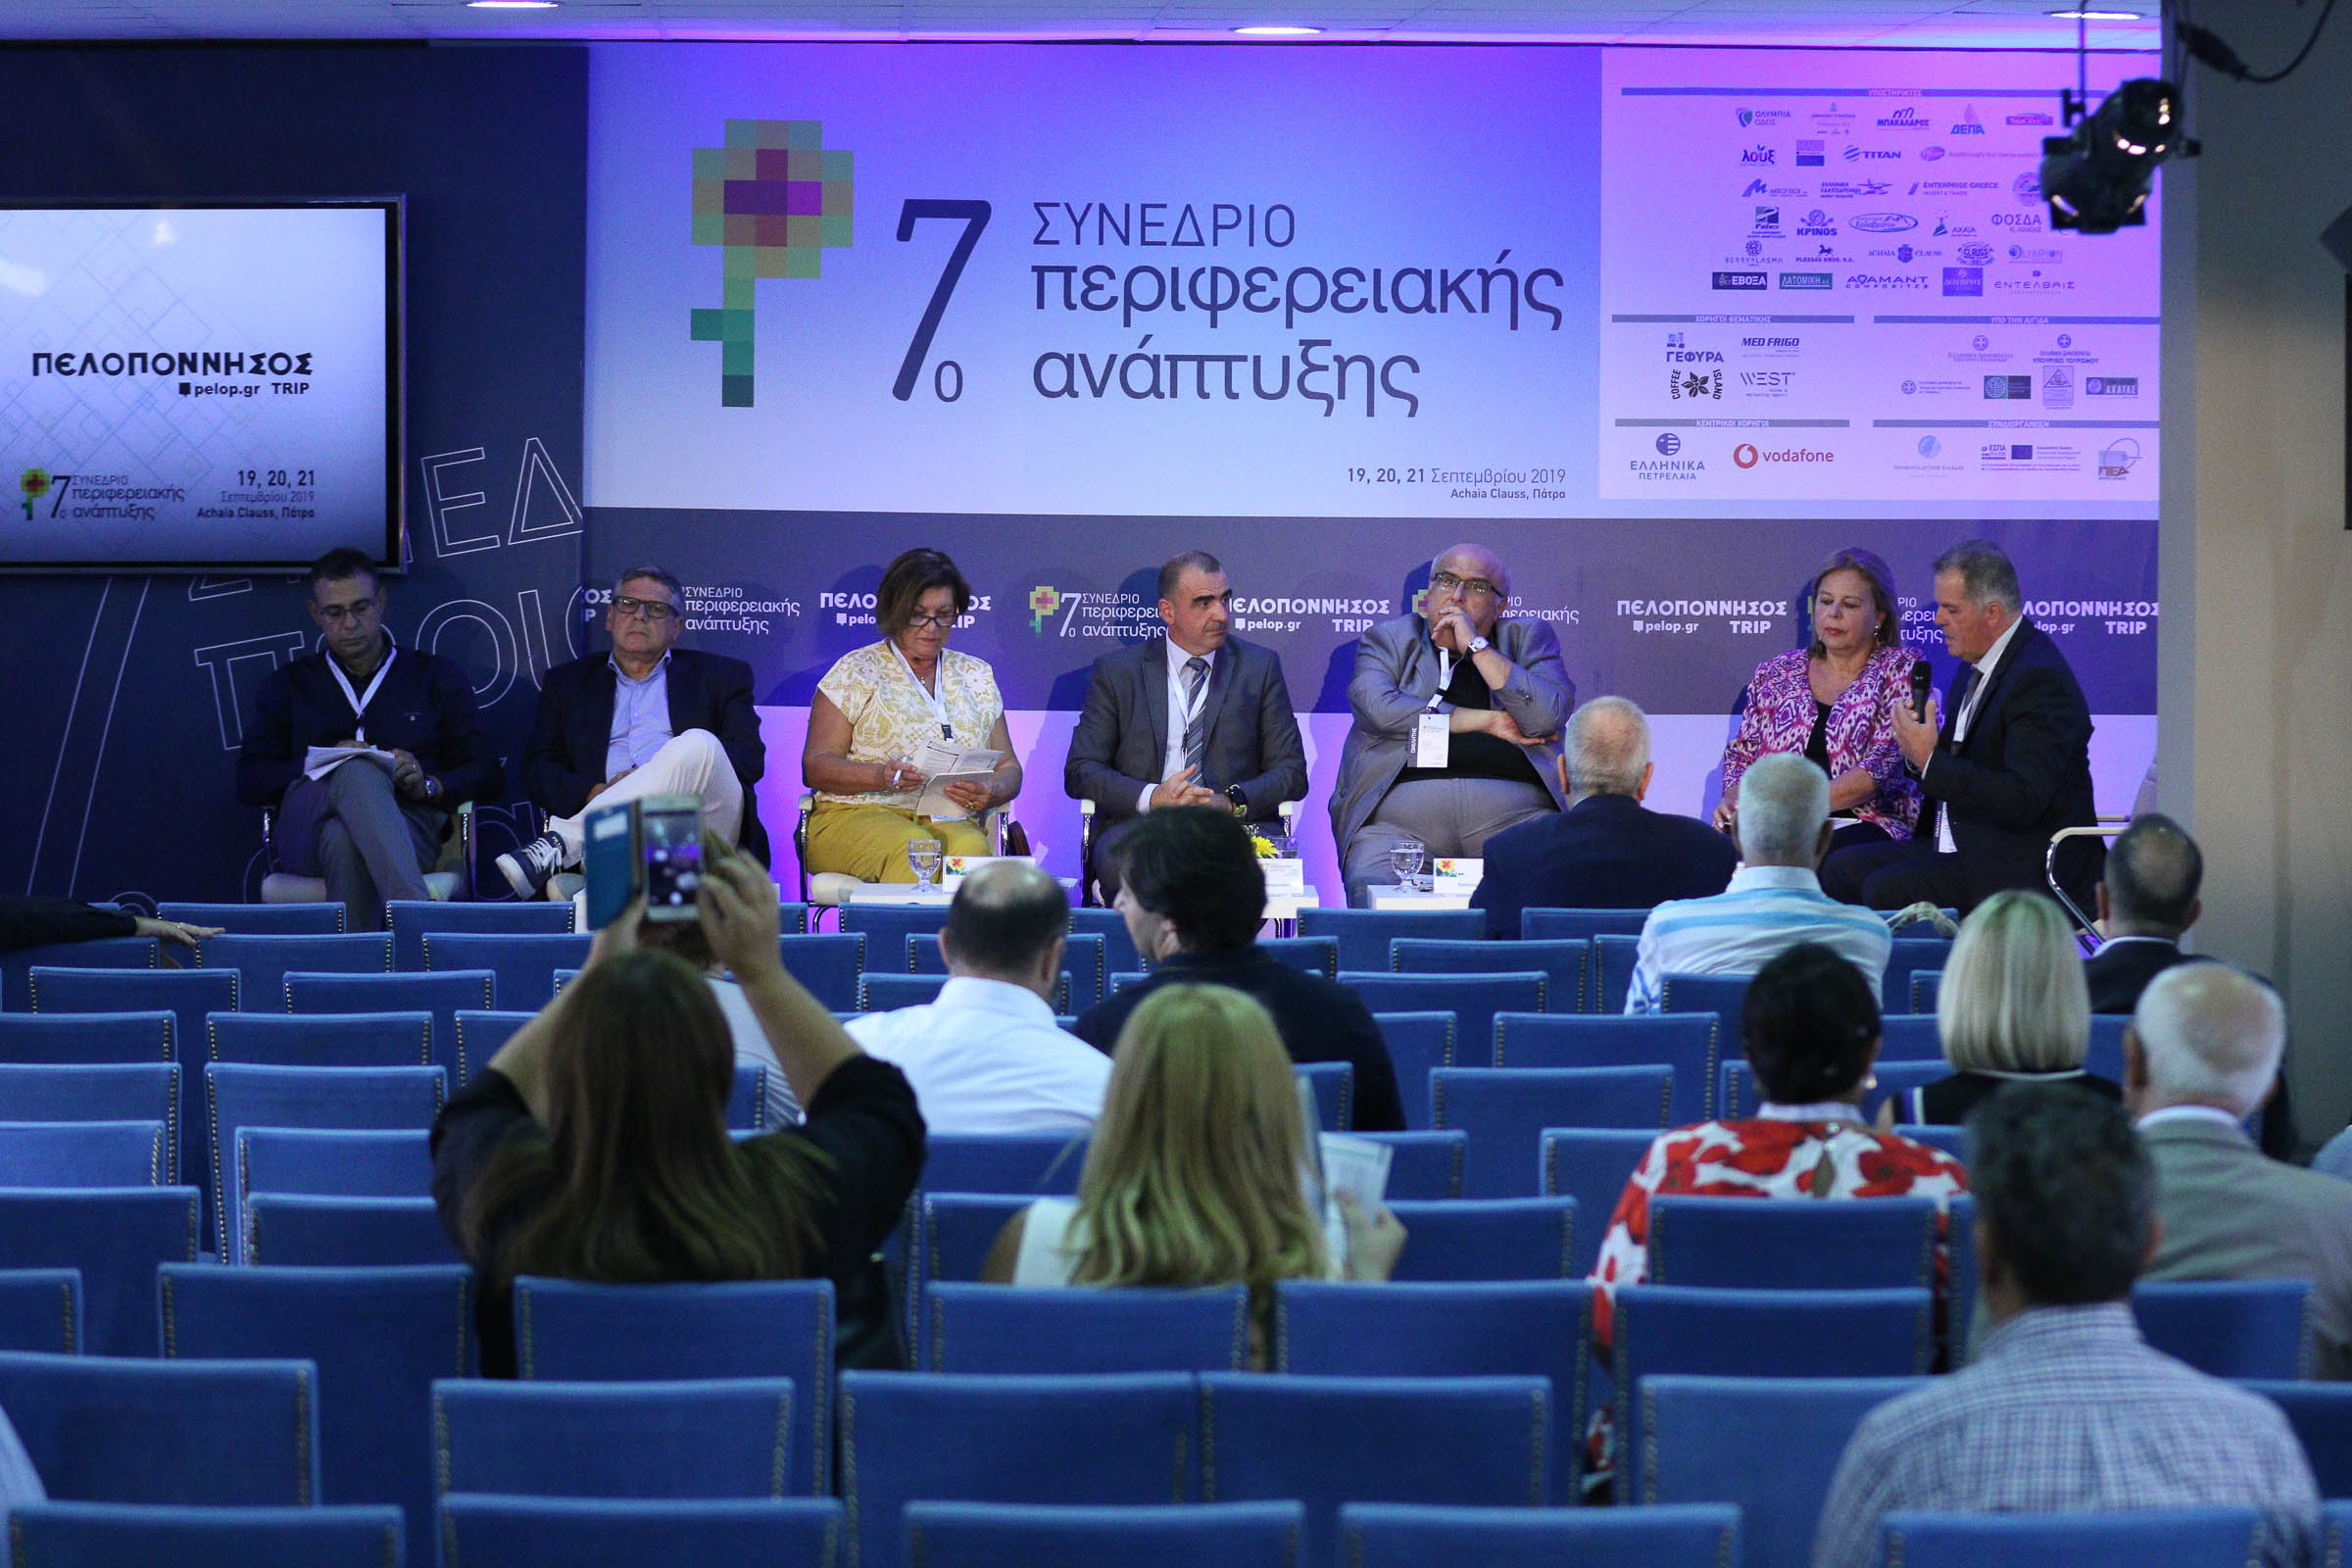 7th Conference on Regional Development